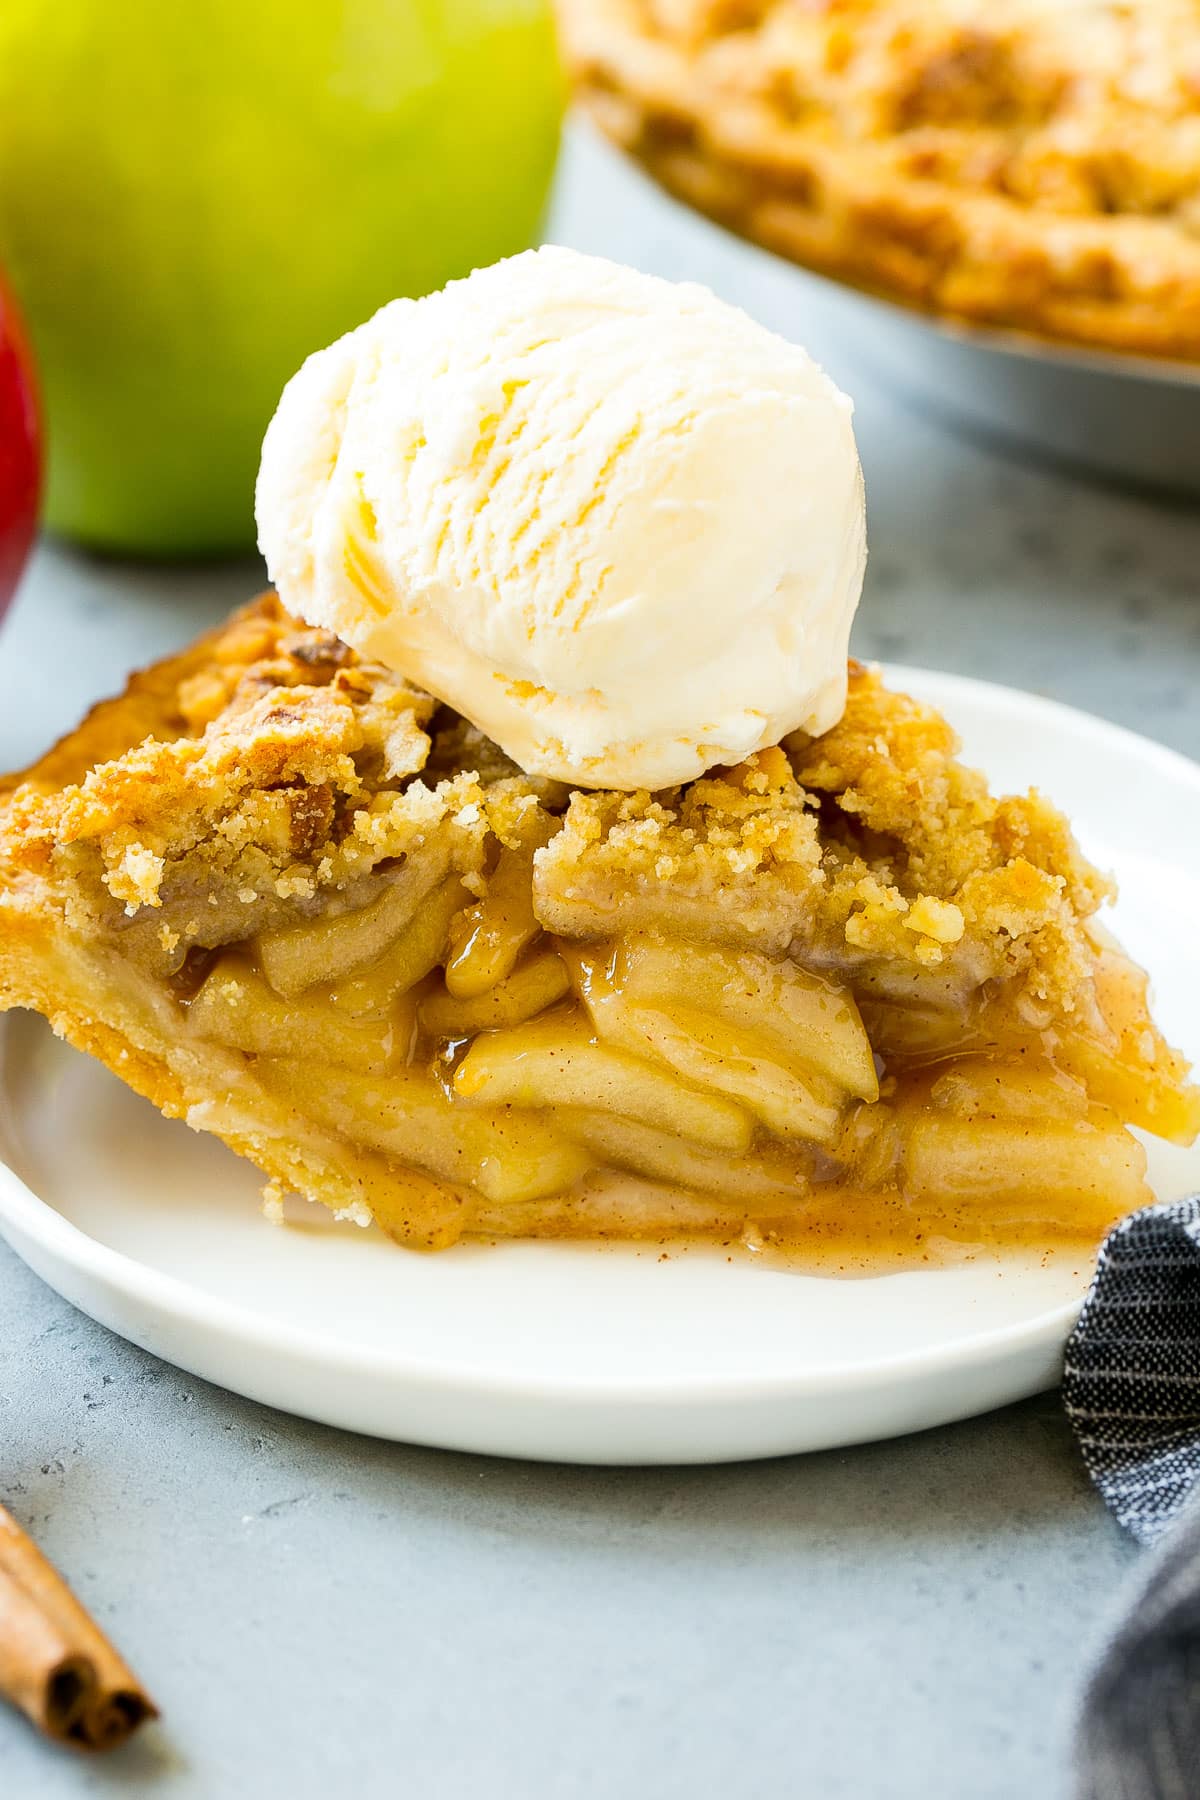 A slice of apple pie topped with ice cream.